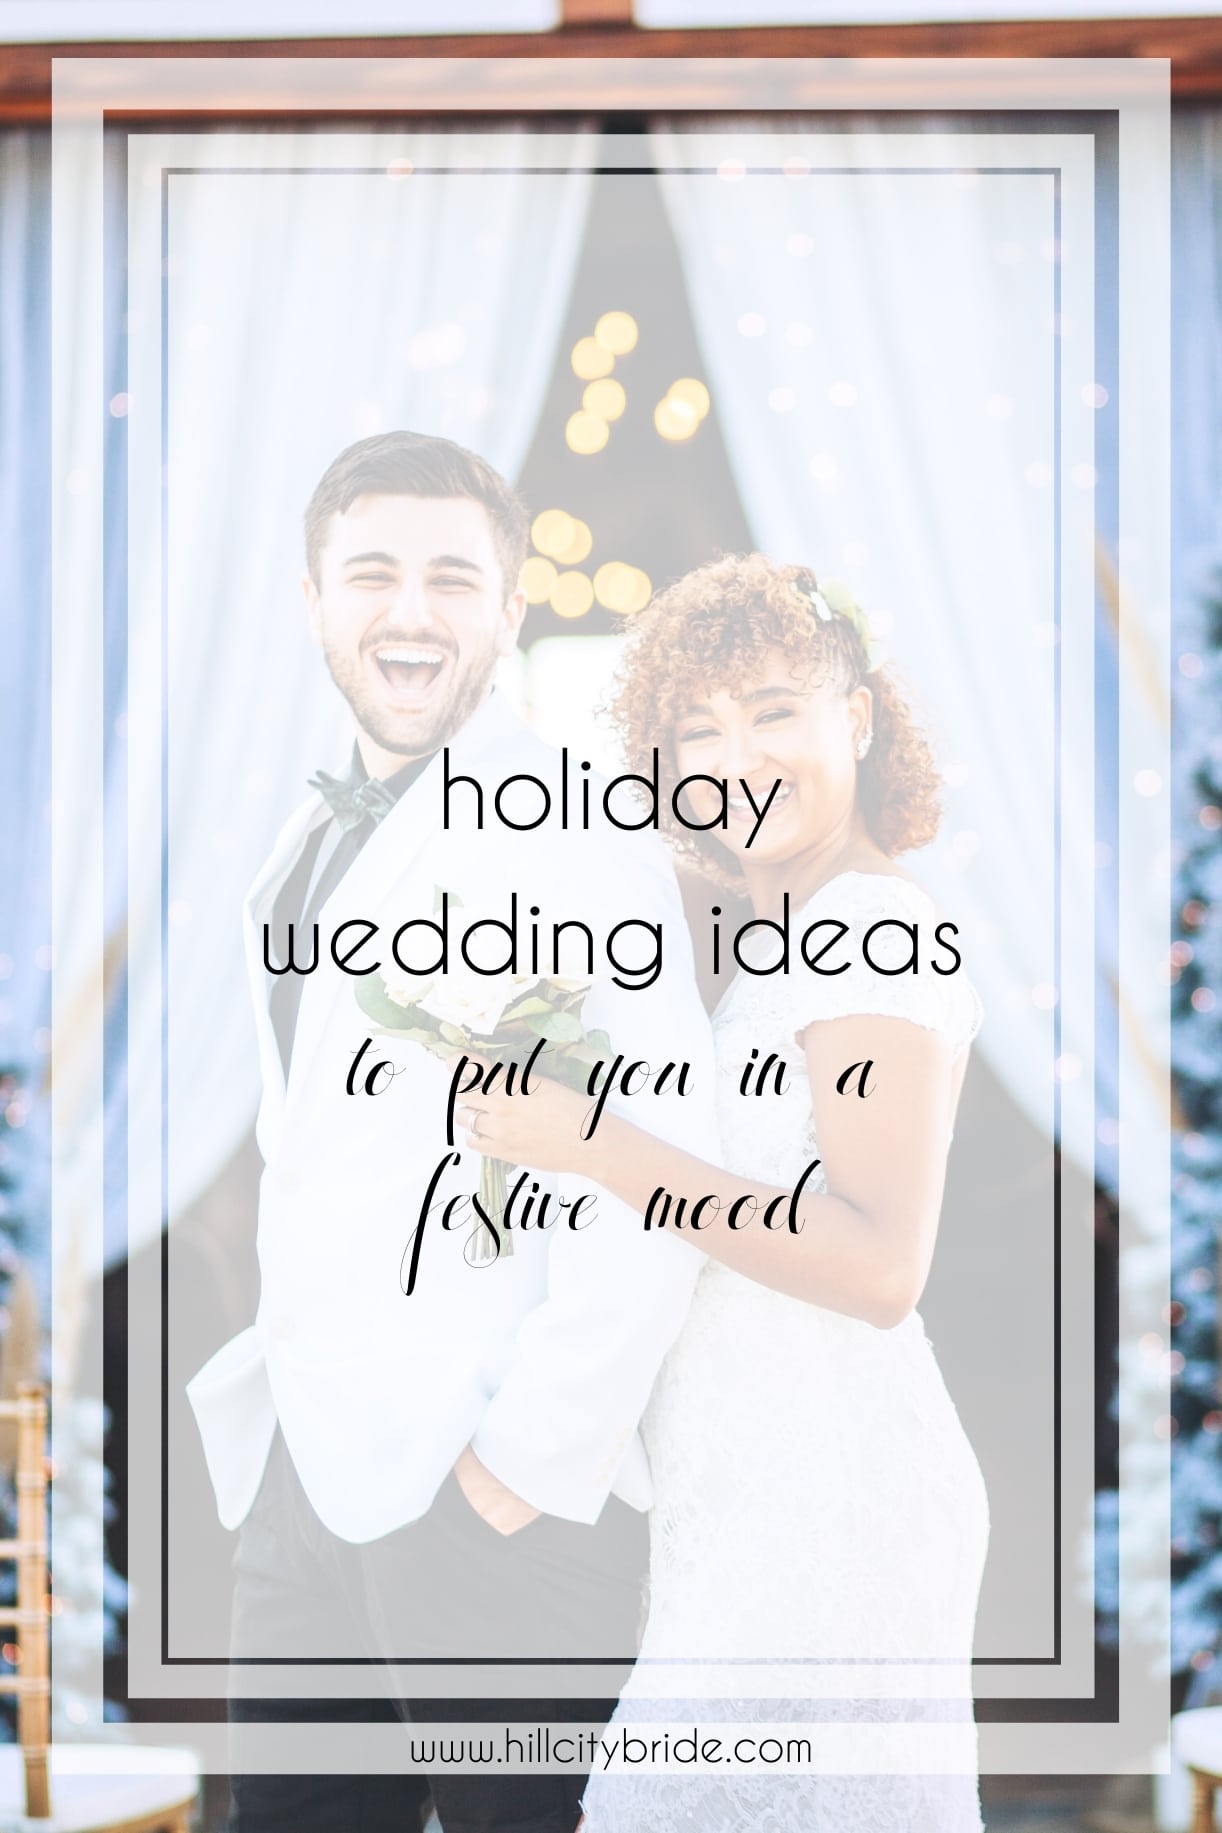 Holiday Wedding Ideas That Will Put You in a Festive Mood